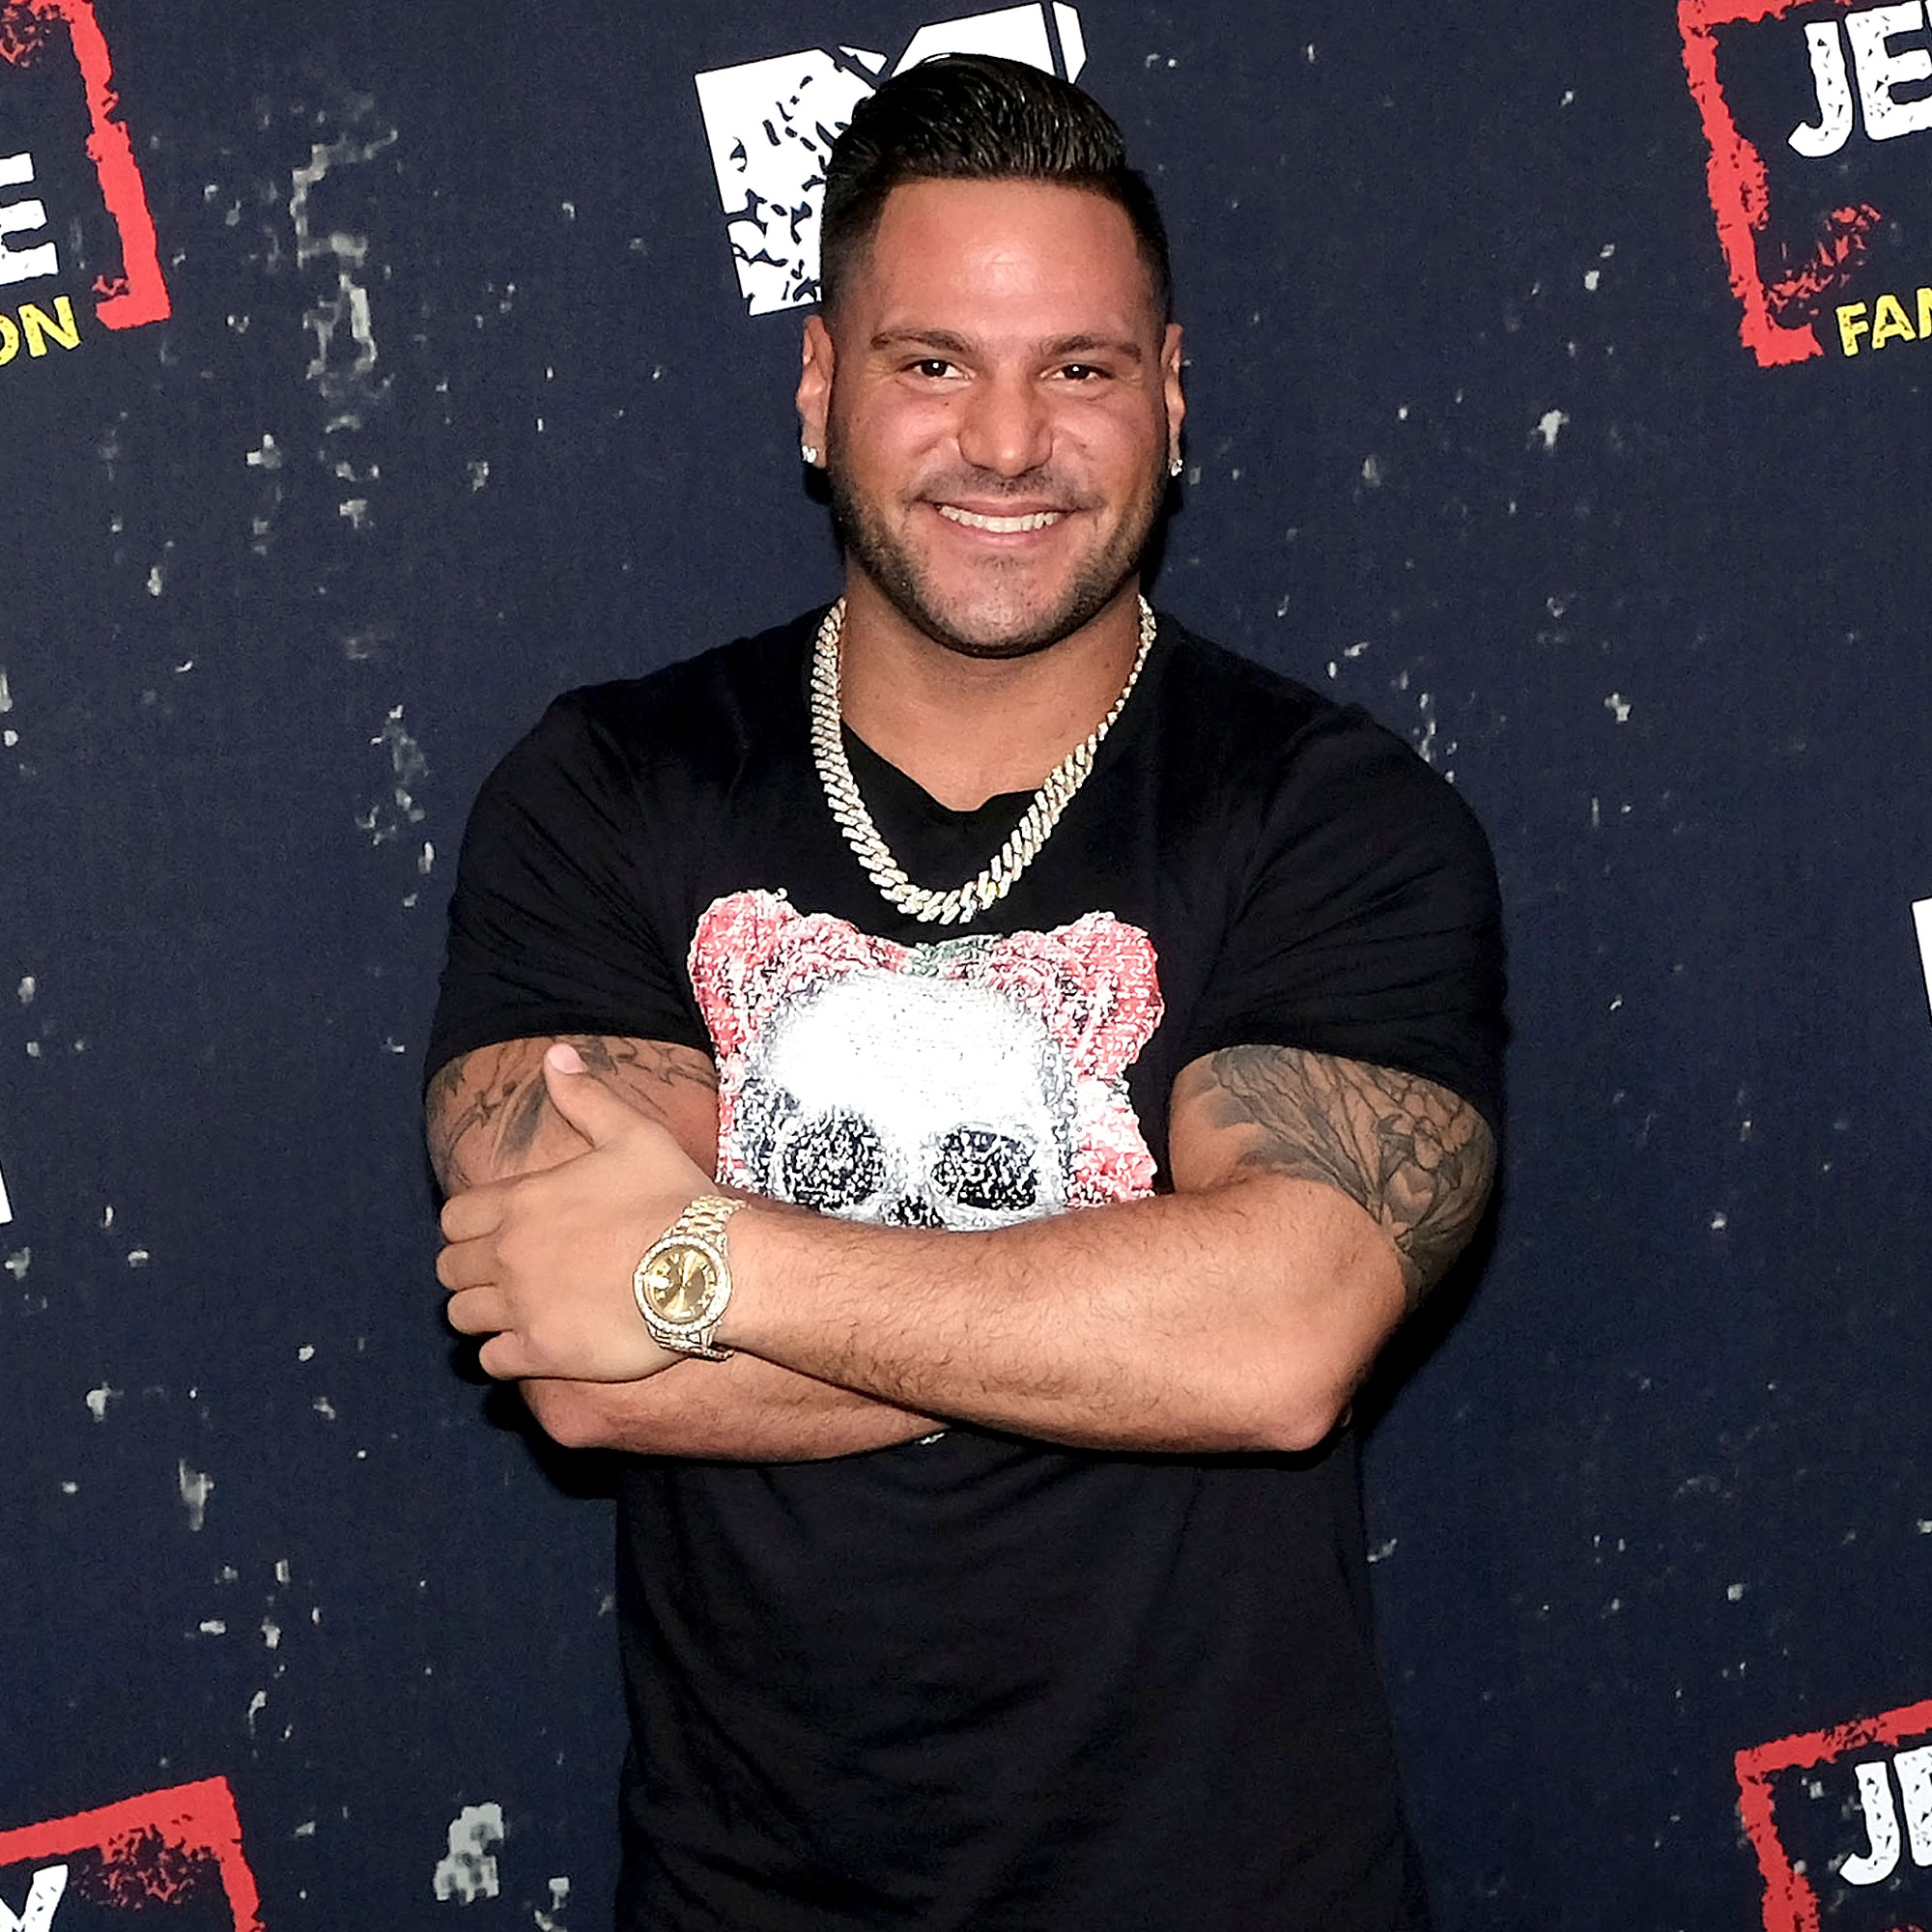 Ronnie Ortiz-Magro's Ups and Downs Through the Years